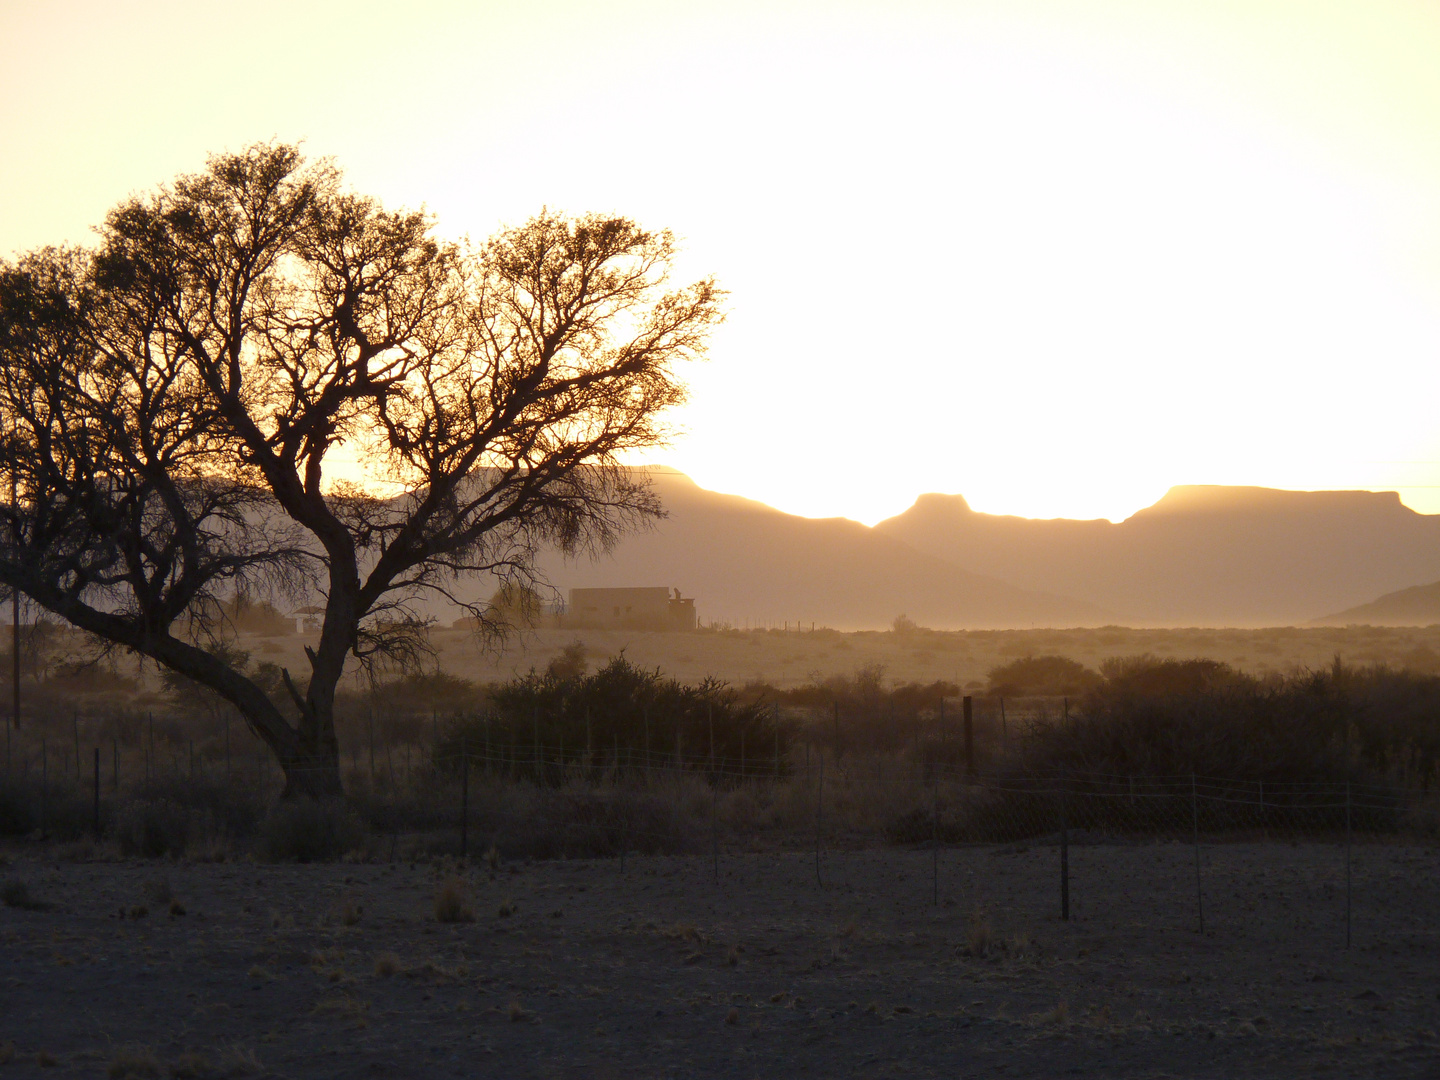 sunset in Namibia